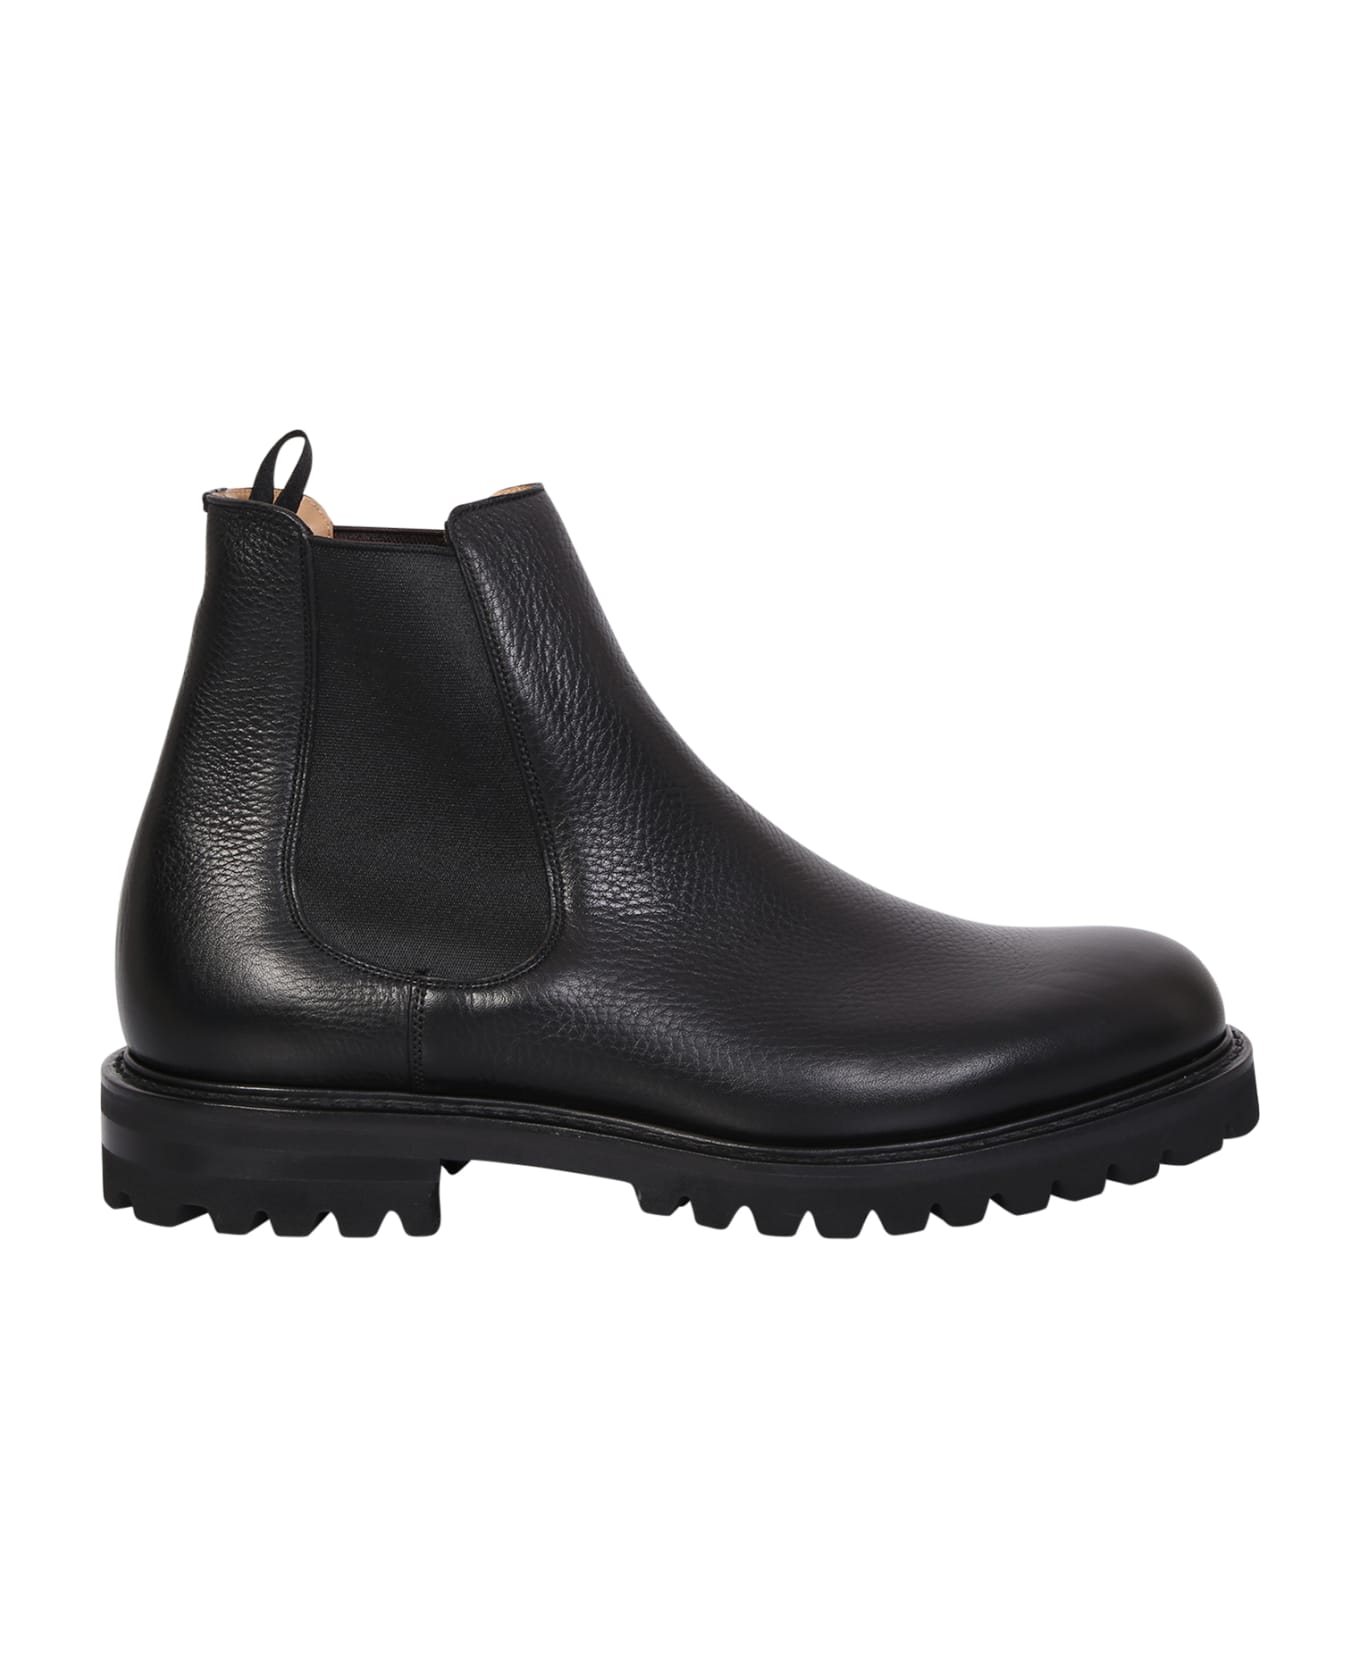 Church's Cornwood Leather Ankle Boots - Black ブーツ